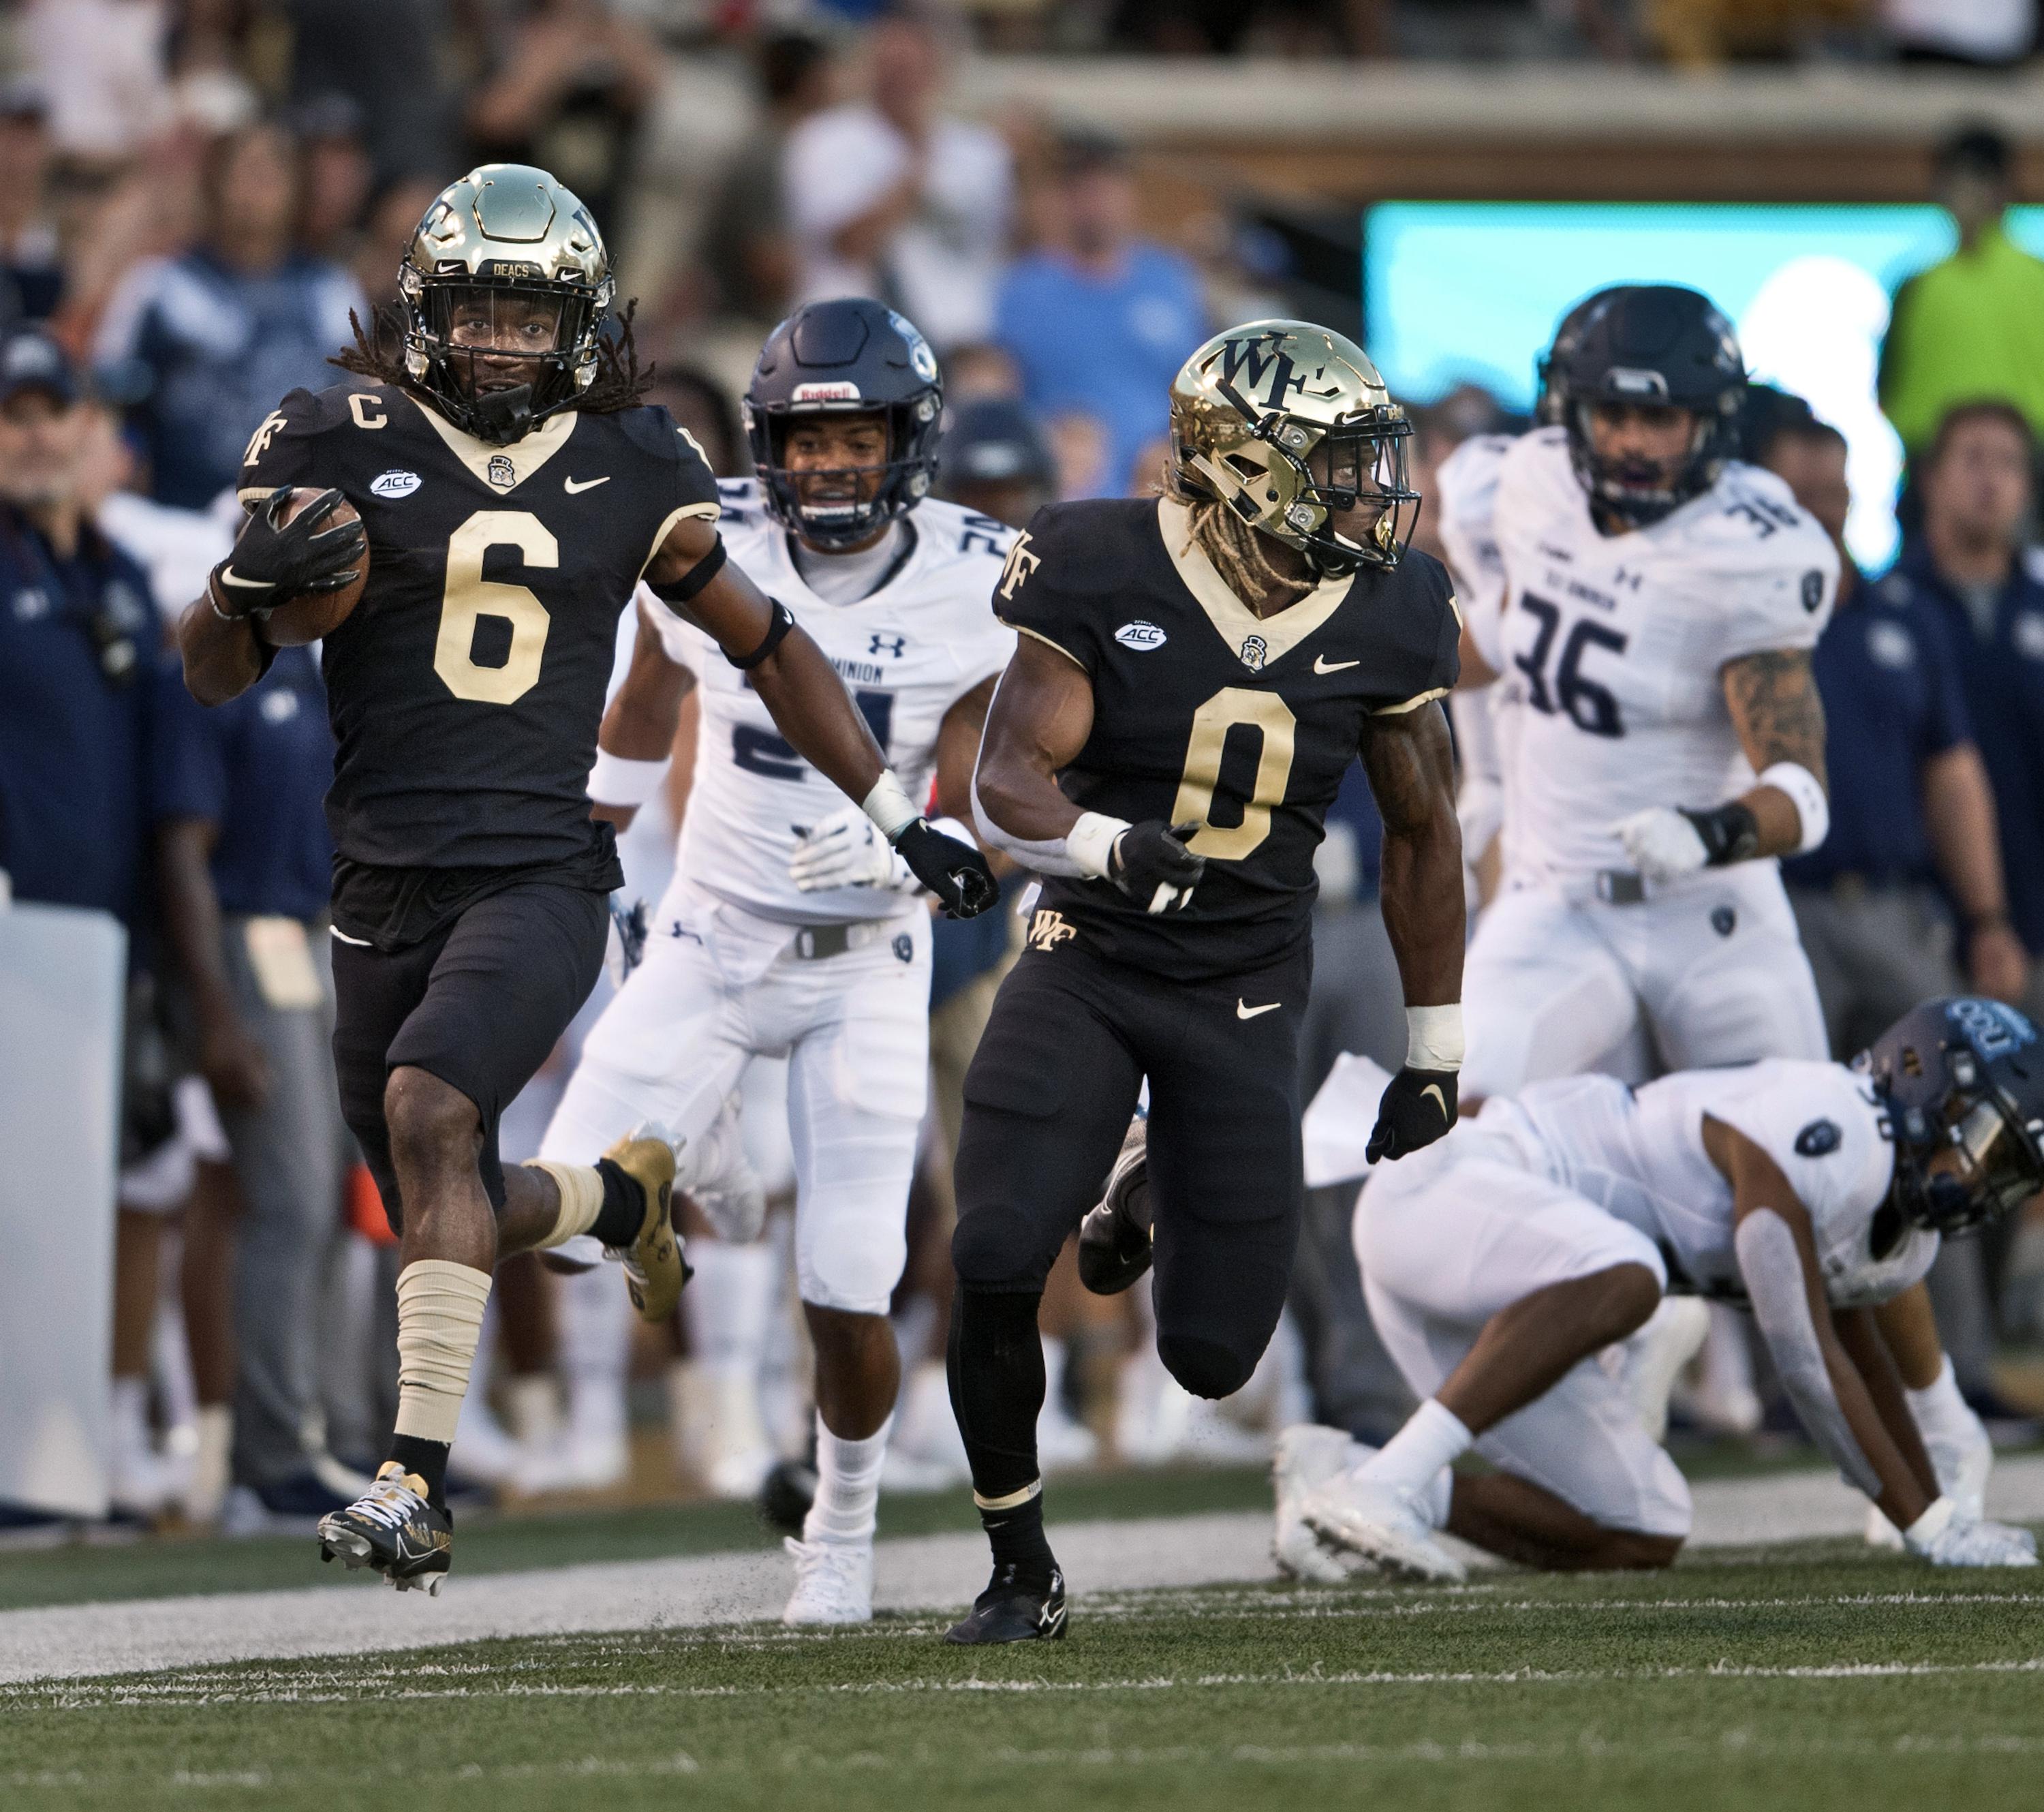 Beal-Smith, Taylor help Wake Forest beat Old Dominion 42-10